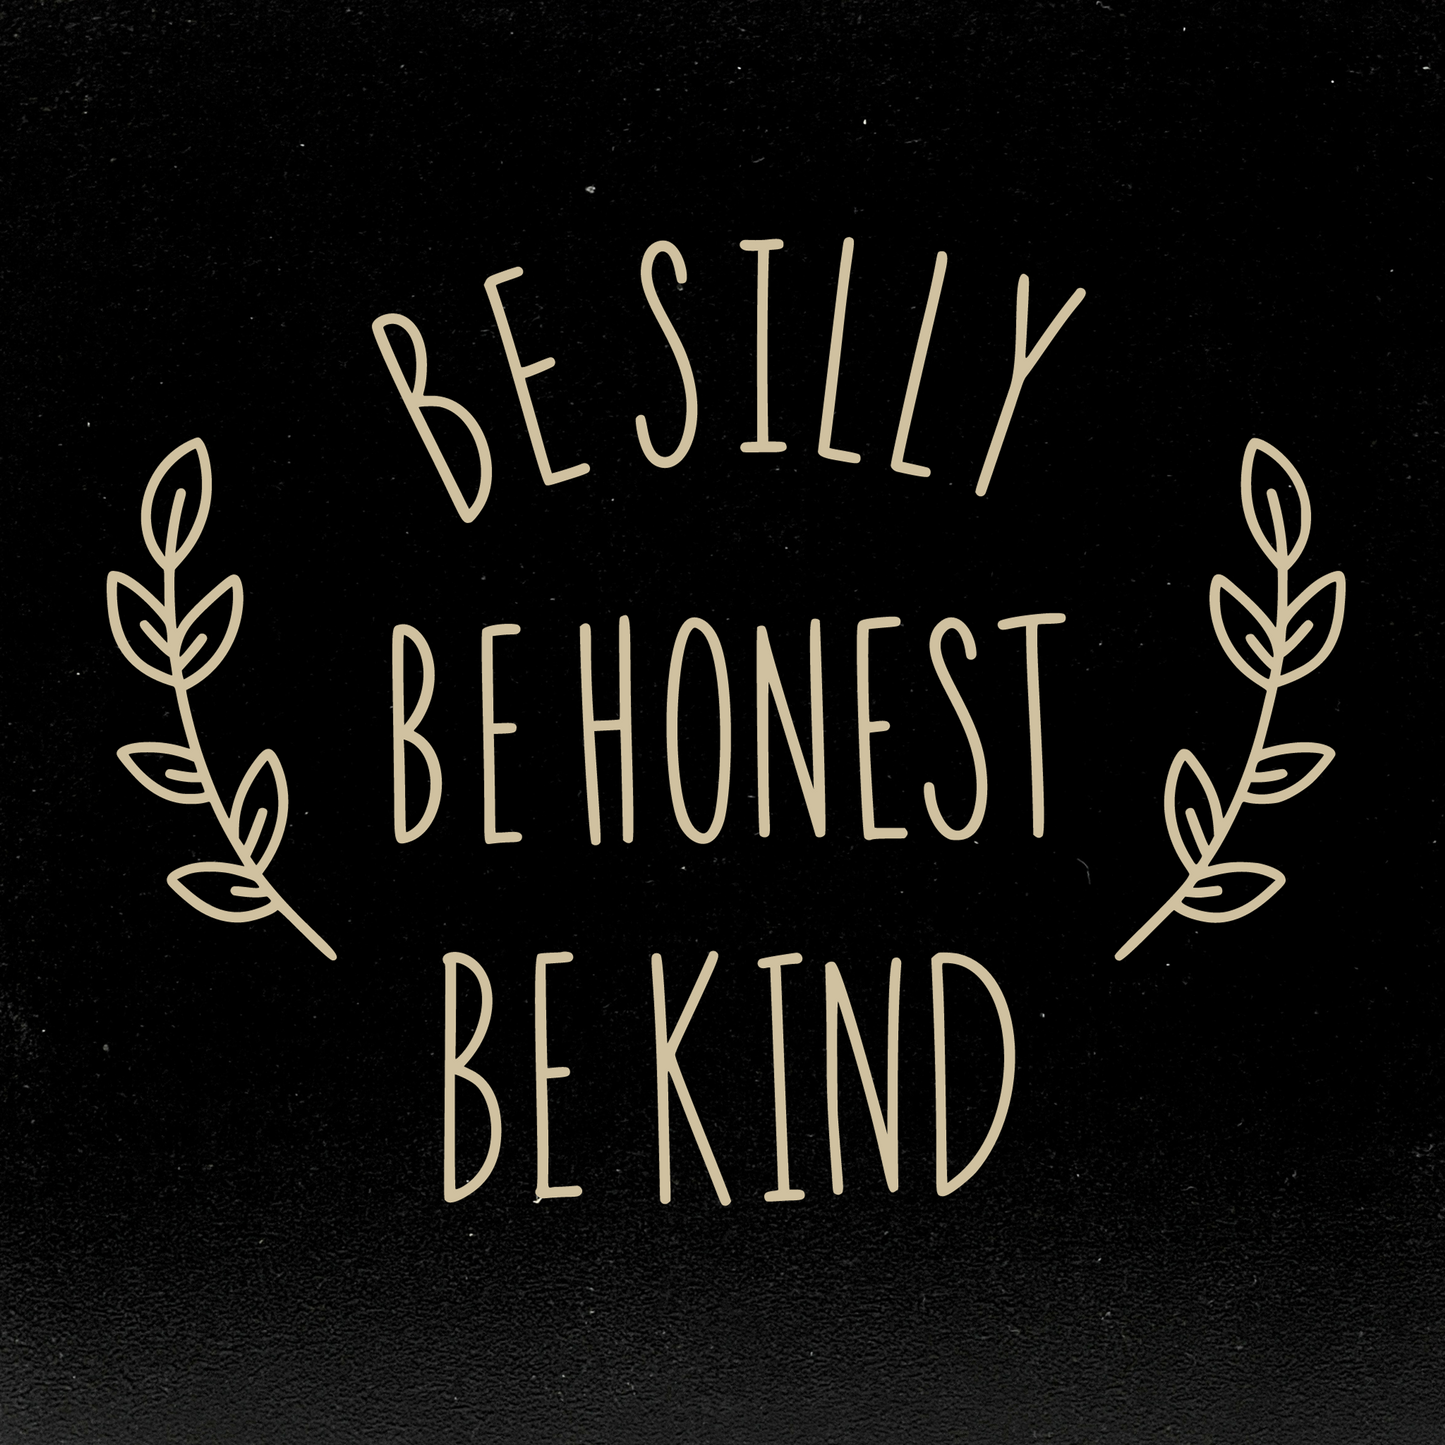 Be Silly Be Honest Be Kind Inspirational Quote